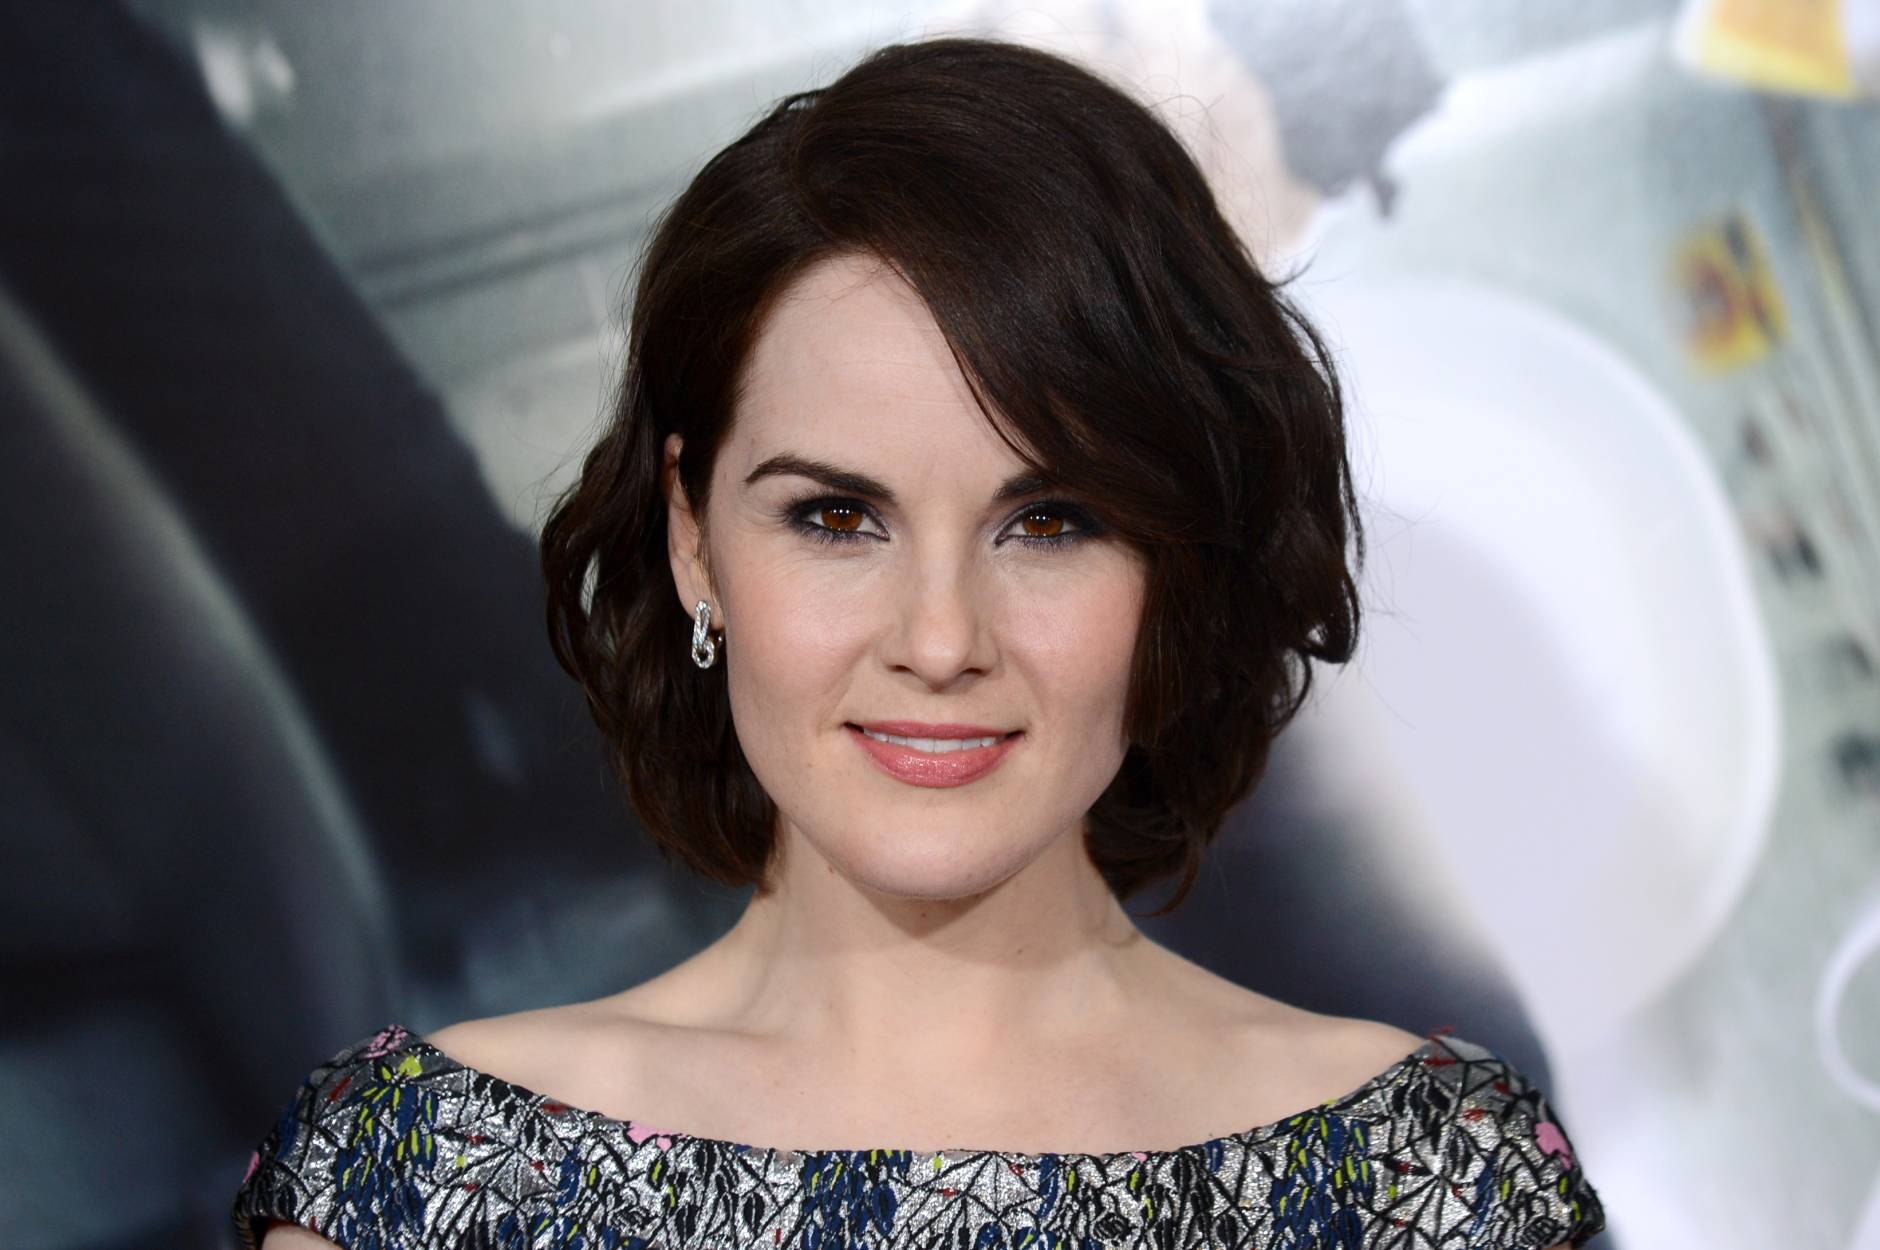 Michelle Dockery arrives at the Los Angeles premiere of "Non-Stop" at the Westwood Regency Village Theater on Monday, Feb. 24, 2014. (Photo by Jordan Strauss/Invision/AP)